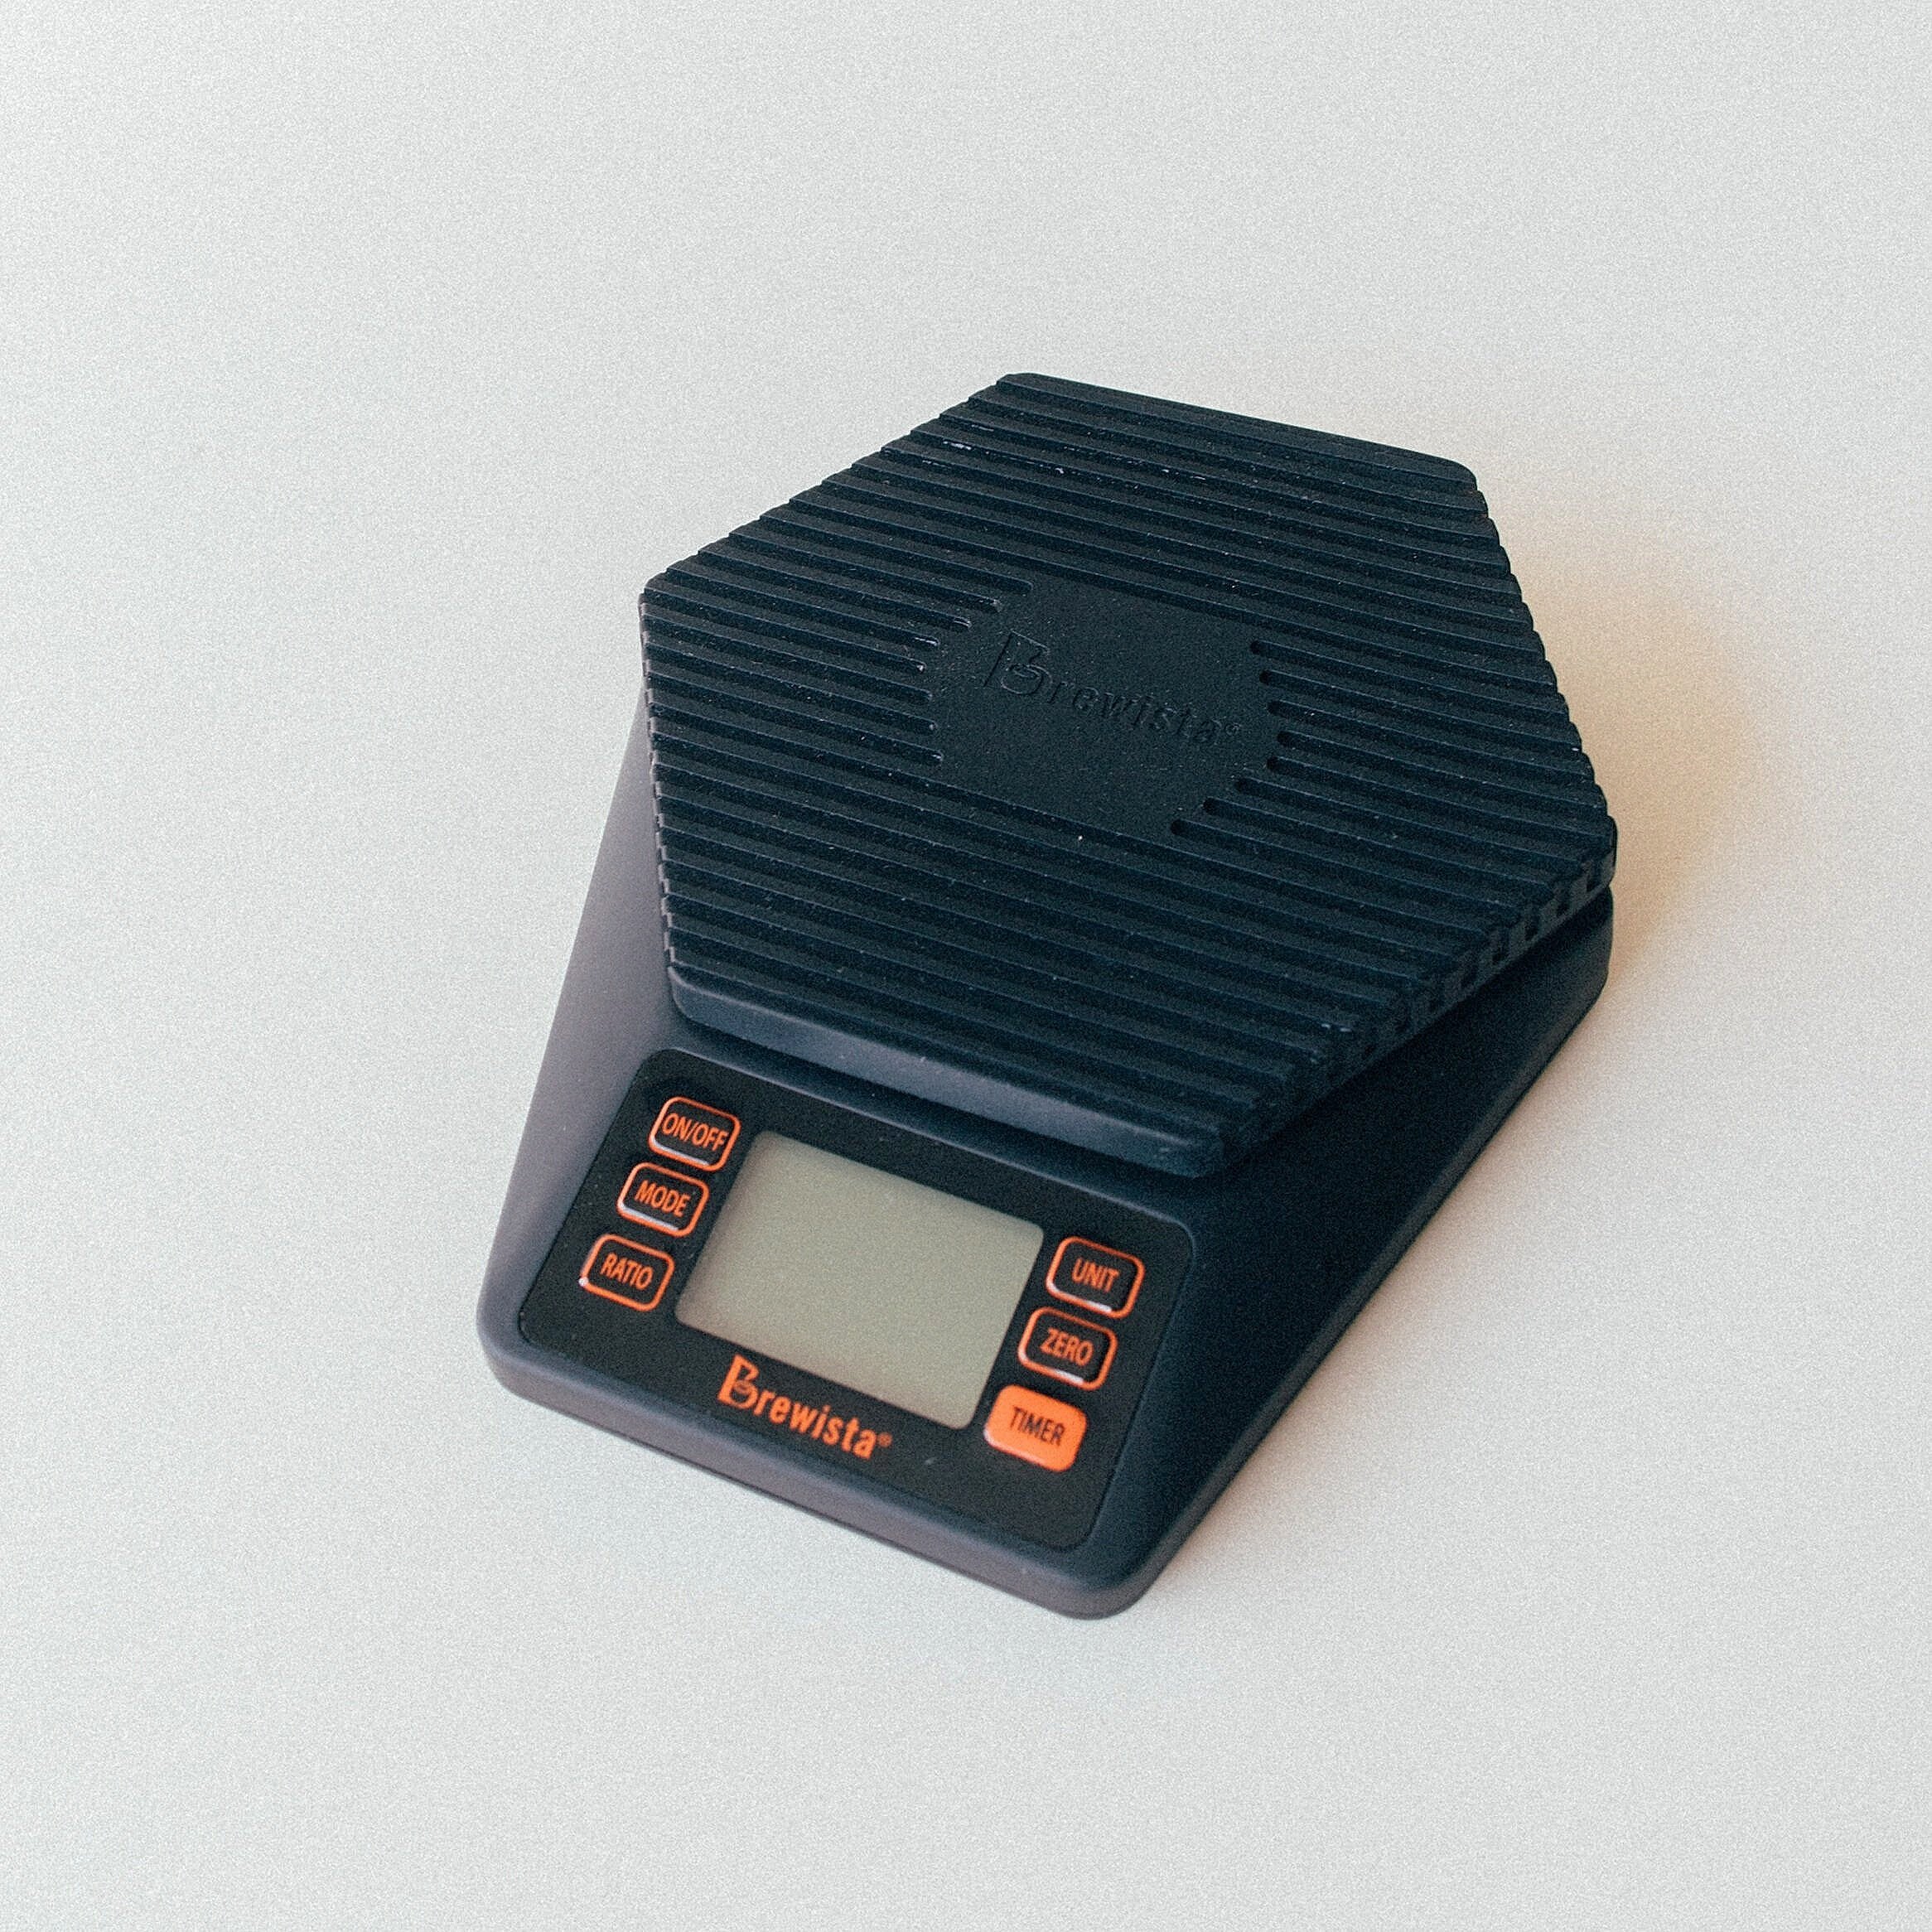 Brewista Smart Coffee Scale with Timer